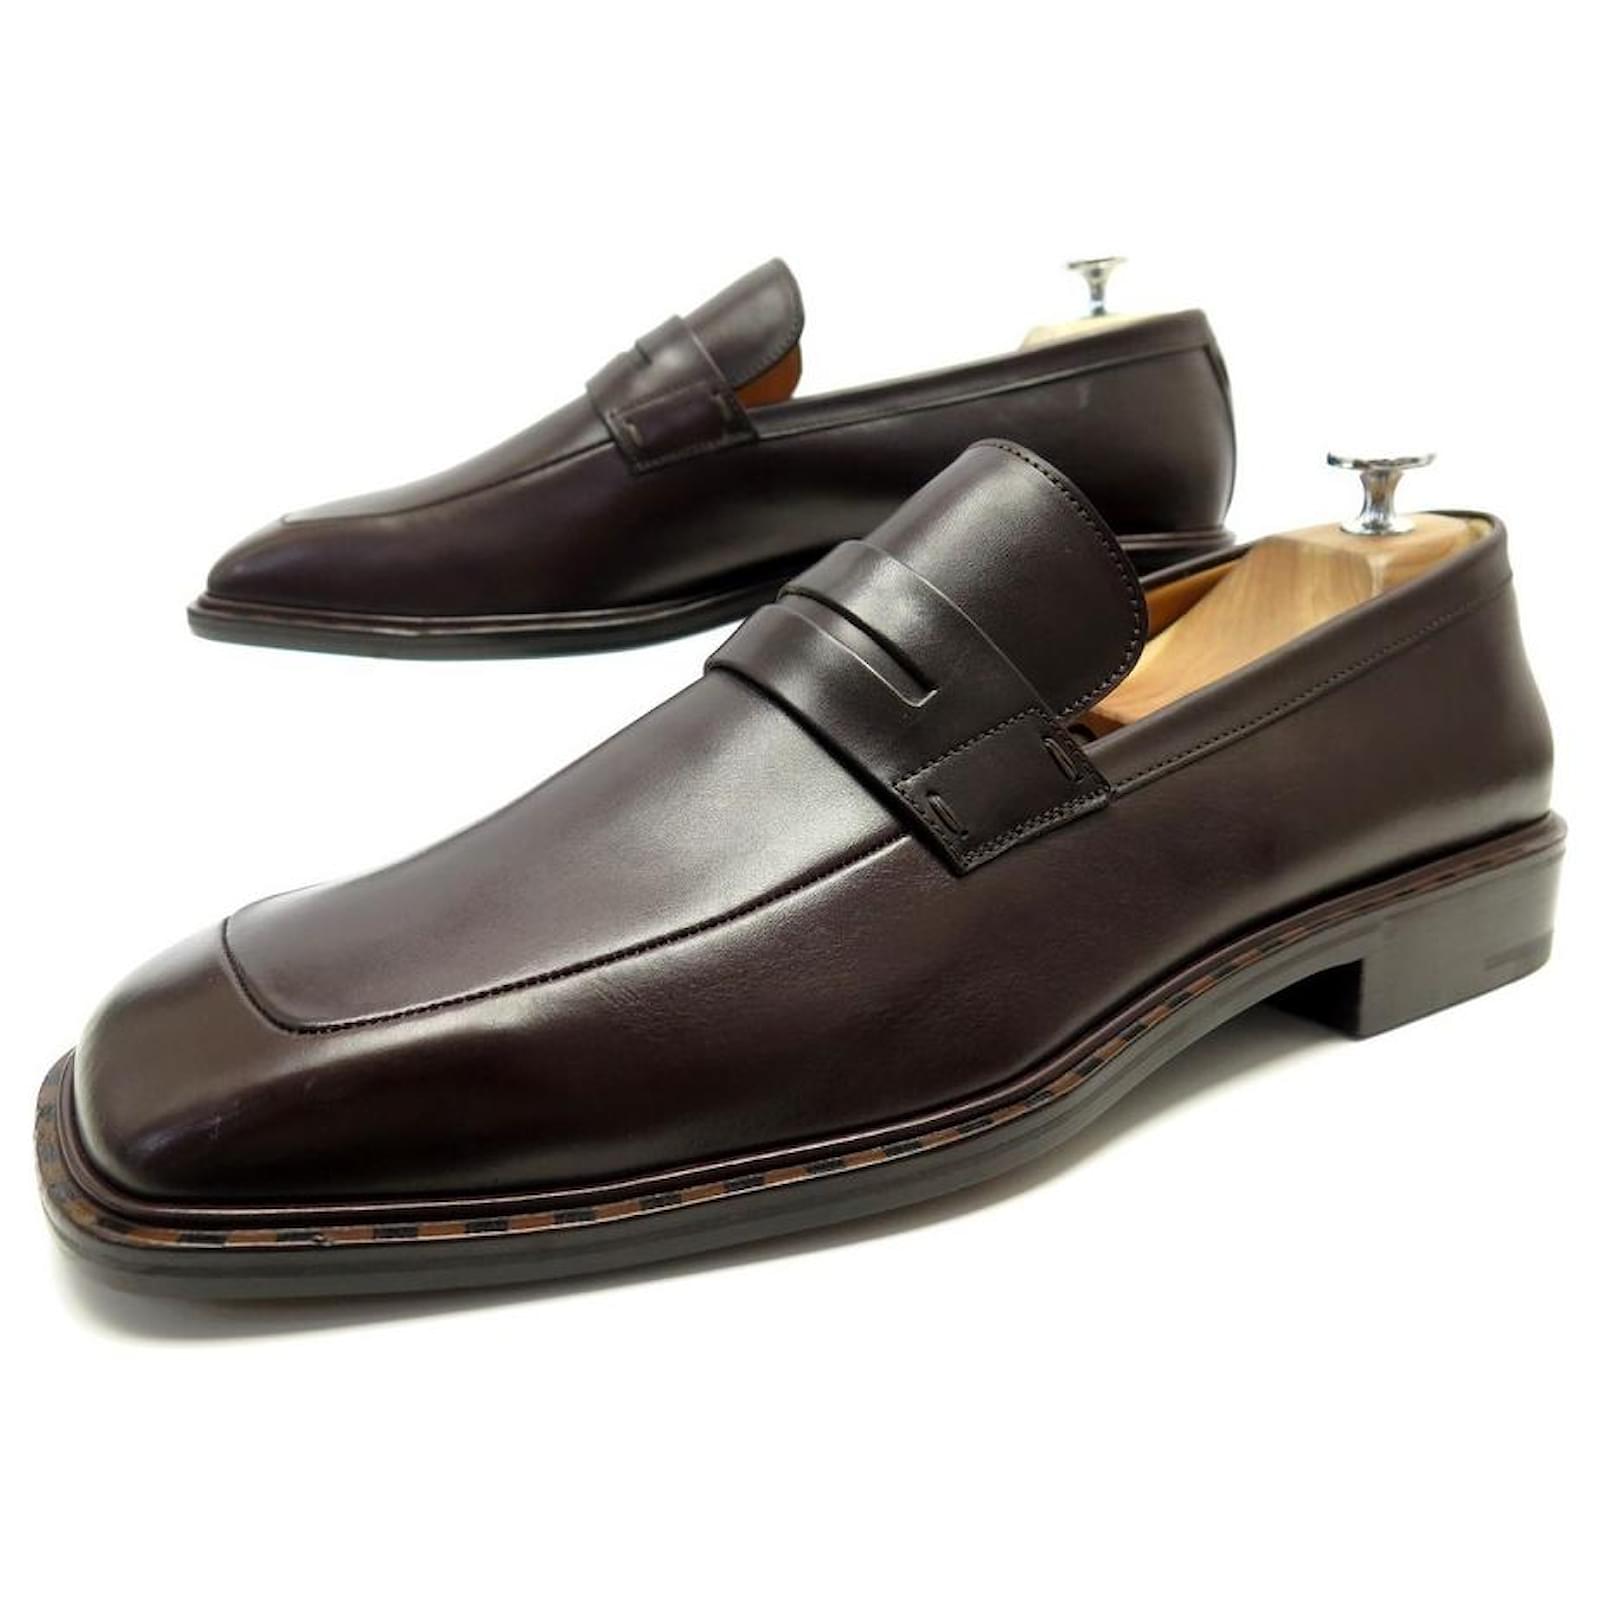 NEW LOUIS VUITTON LOAFERS 10 44 BROWN LEATHER LOAFER SHOES ref